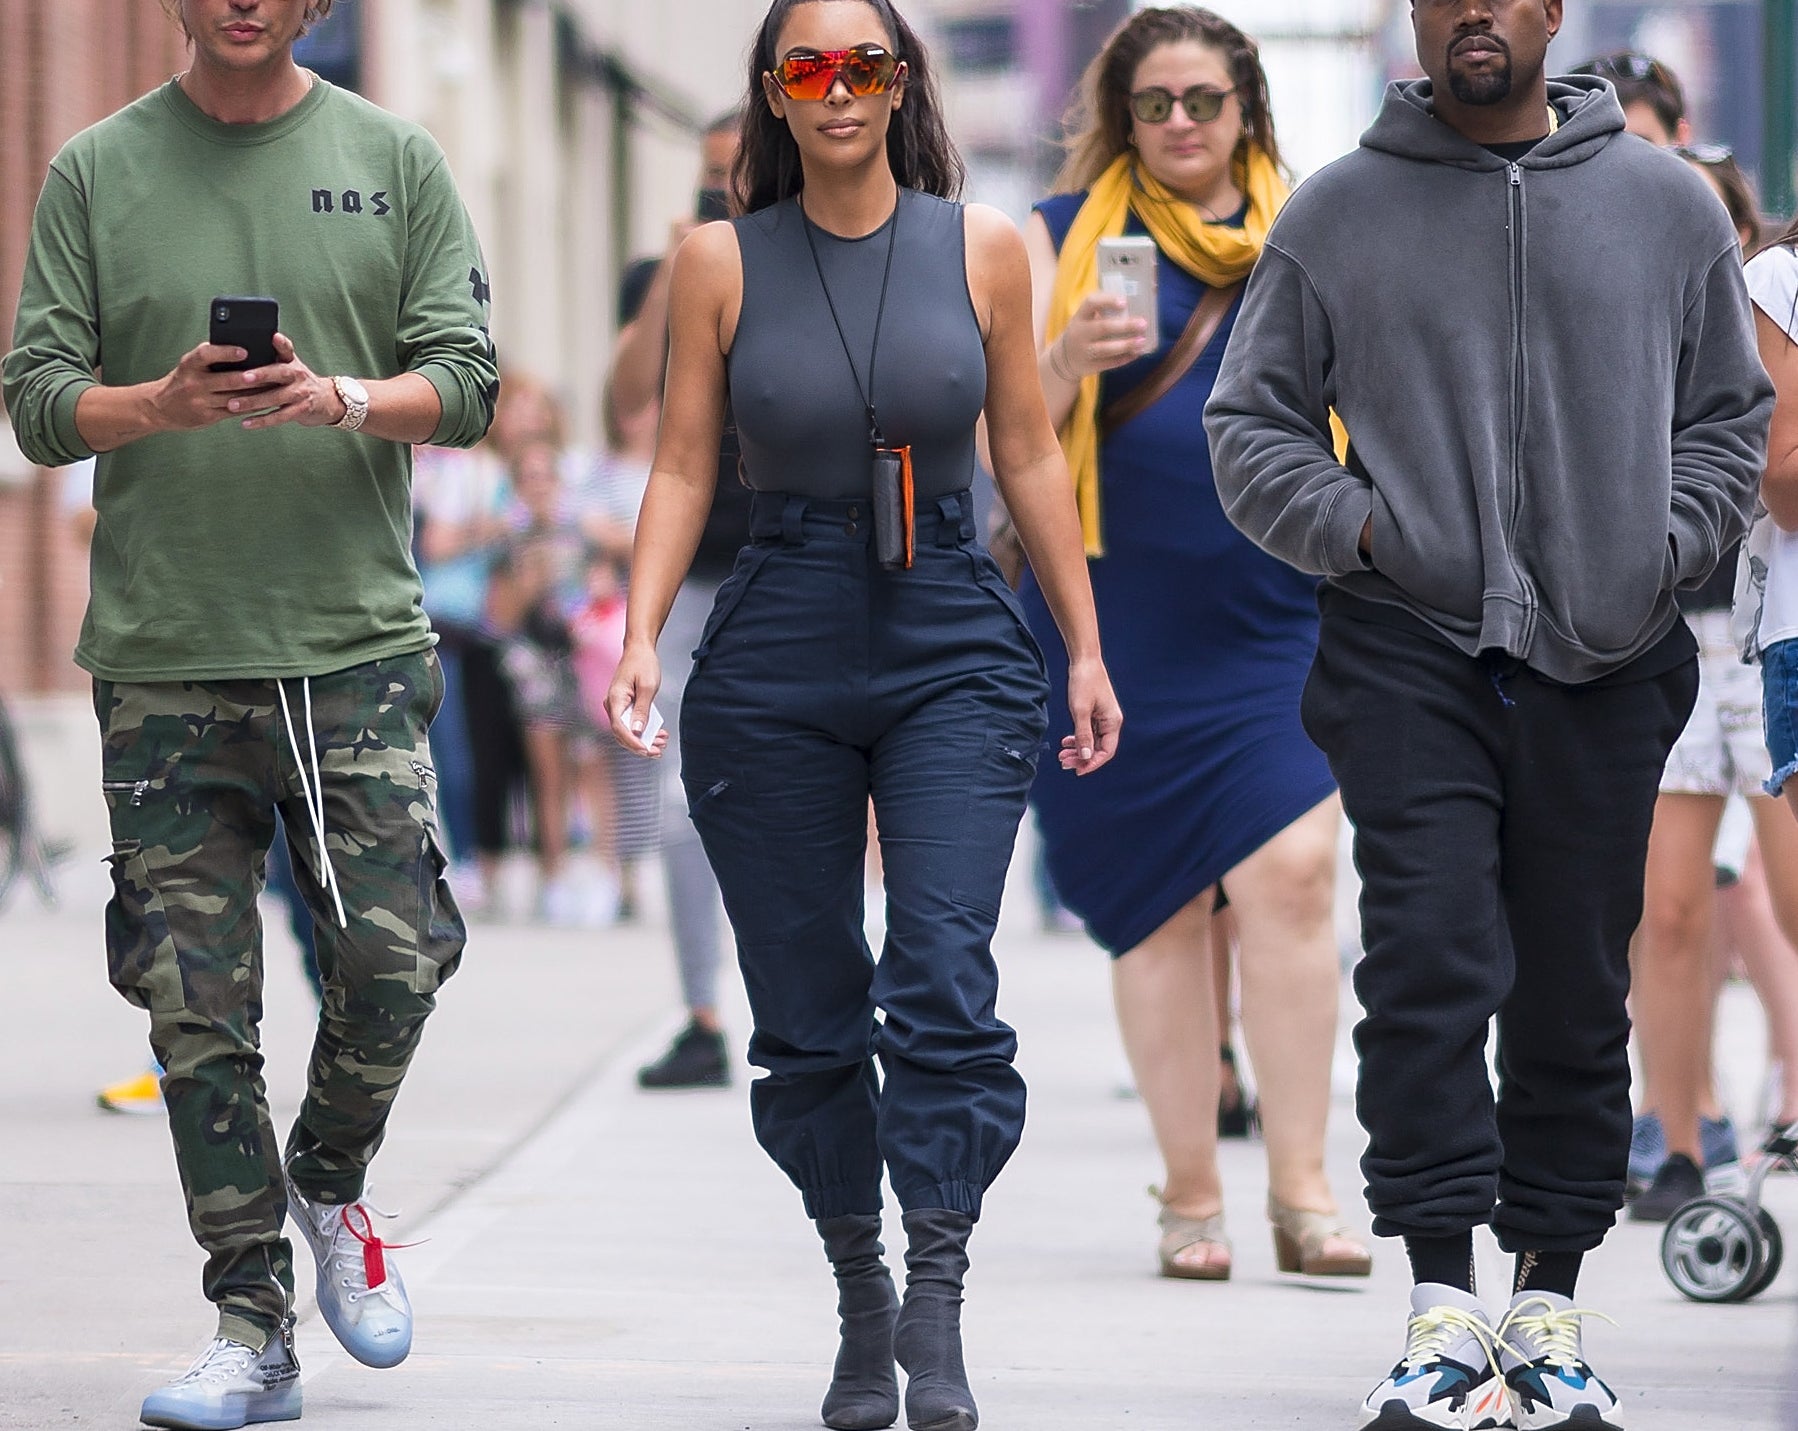 Kim, Jonathan, and Kanye walk together down a street in New York City